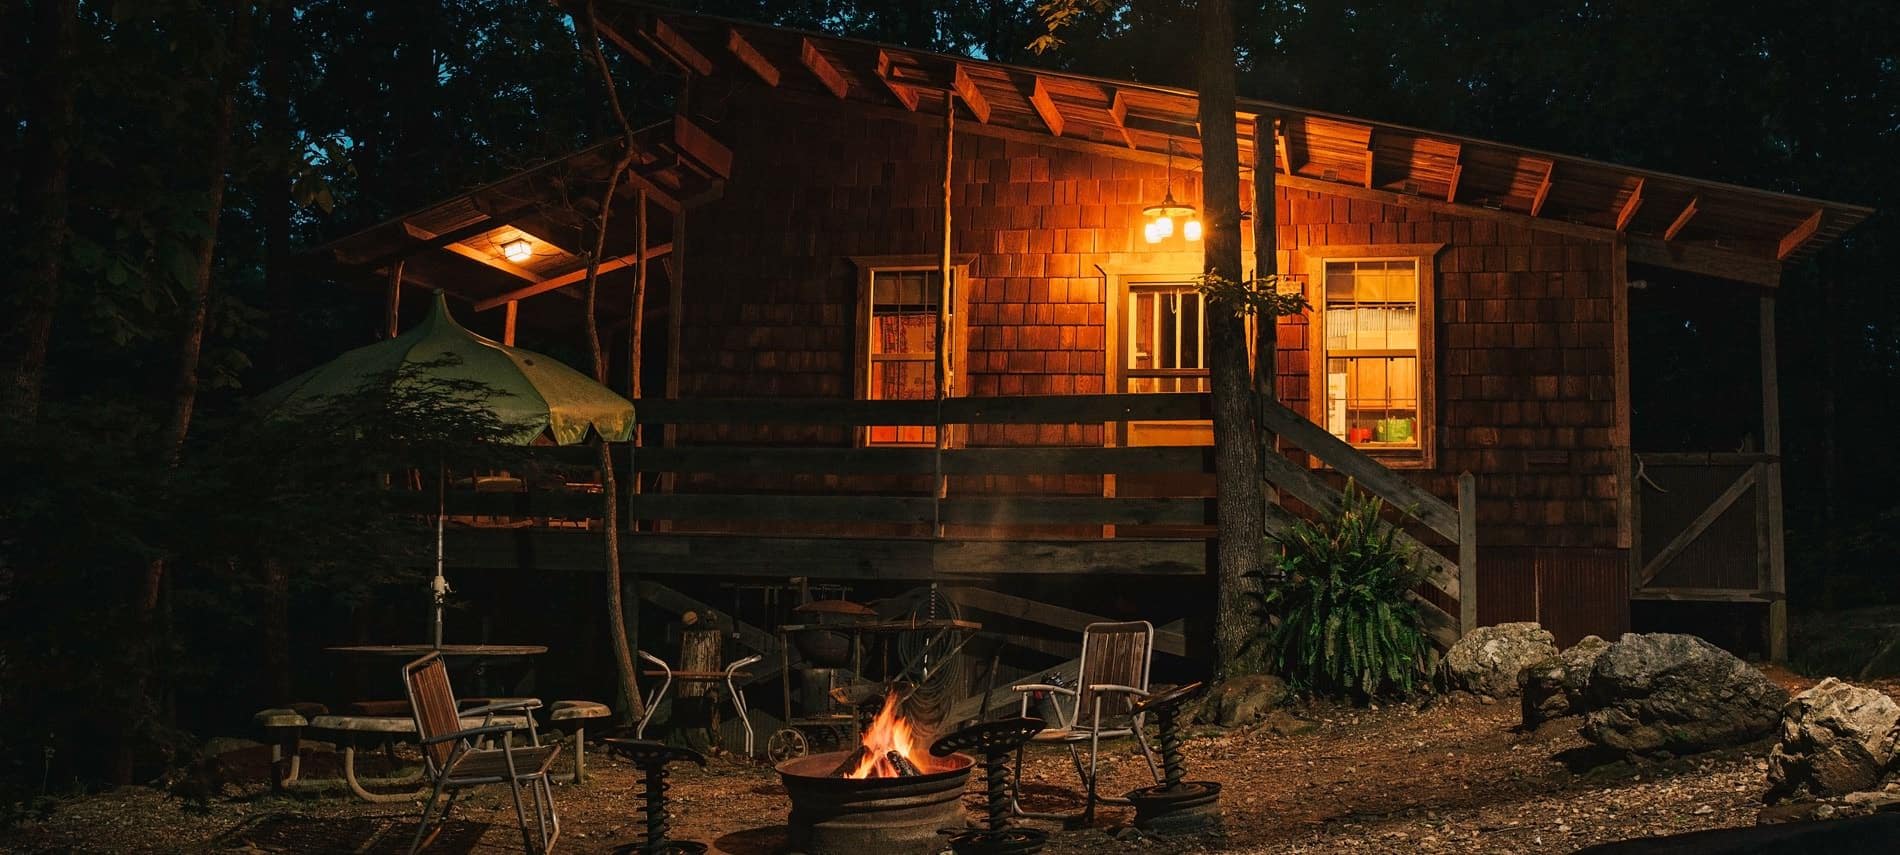 Exterior view of cabin at night with warm glowing fire pit